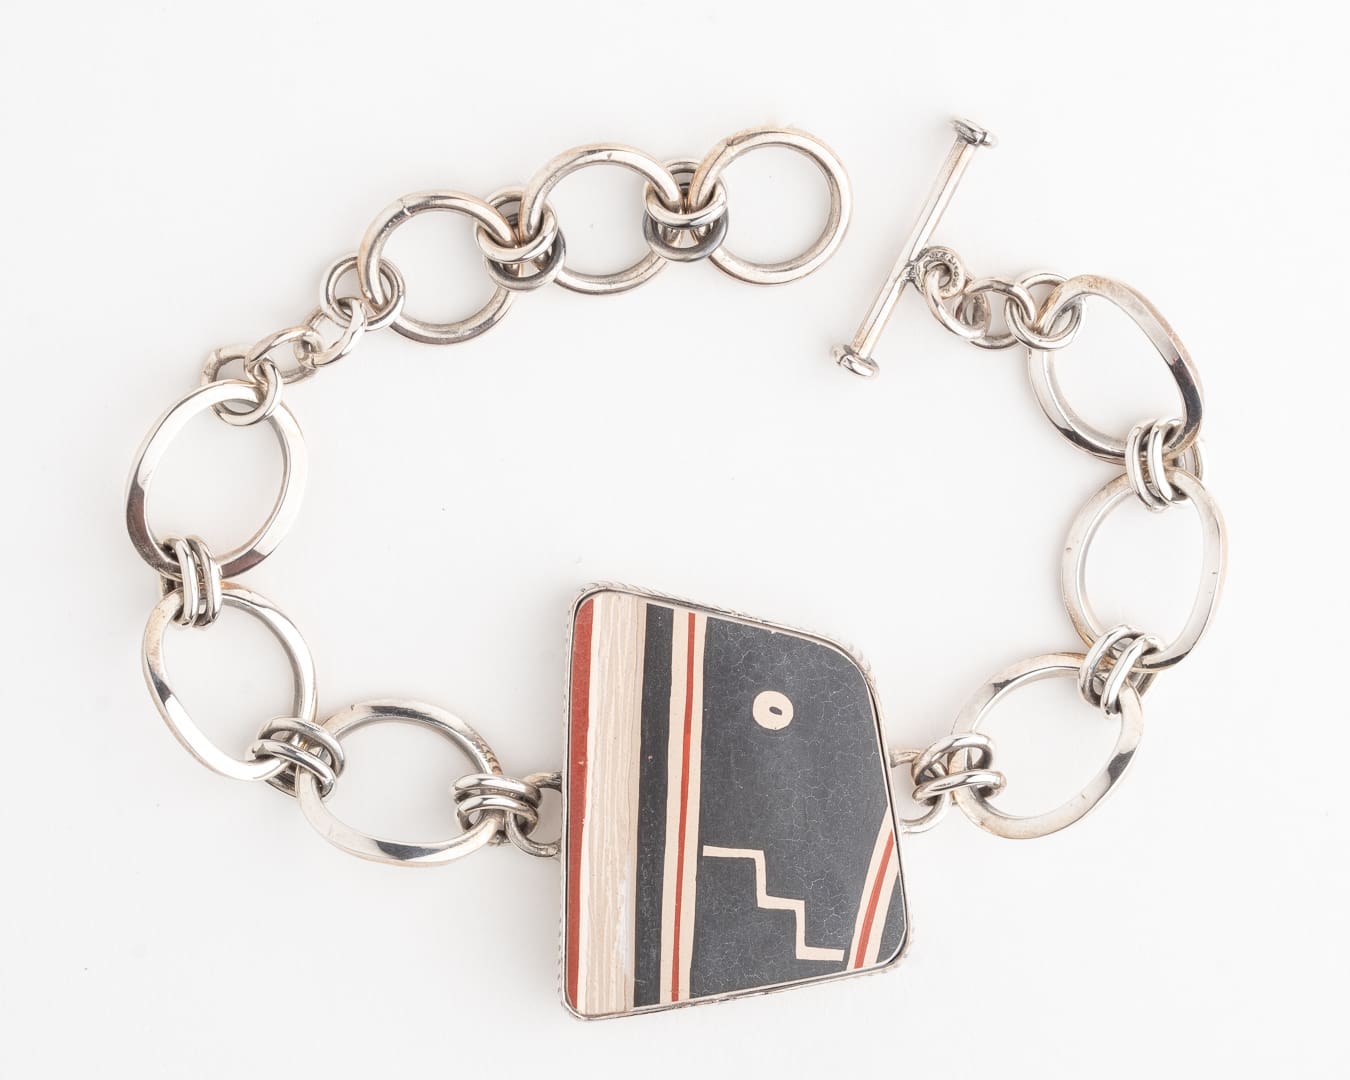 A silver bracelet with a black and red striped design.